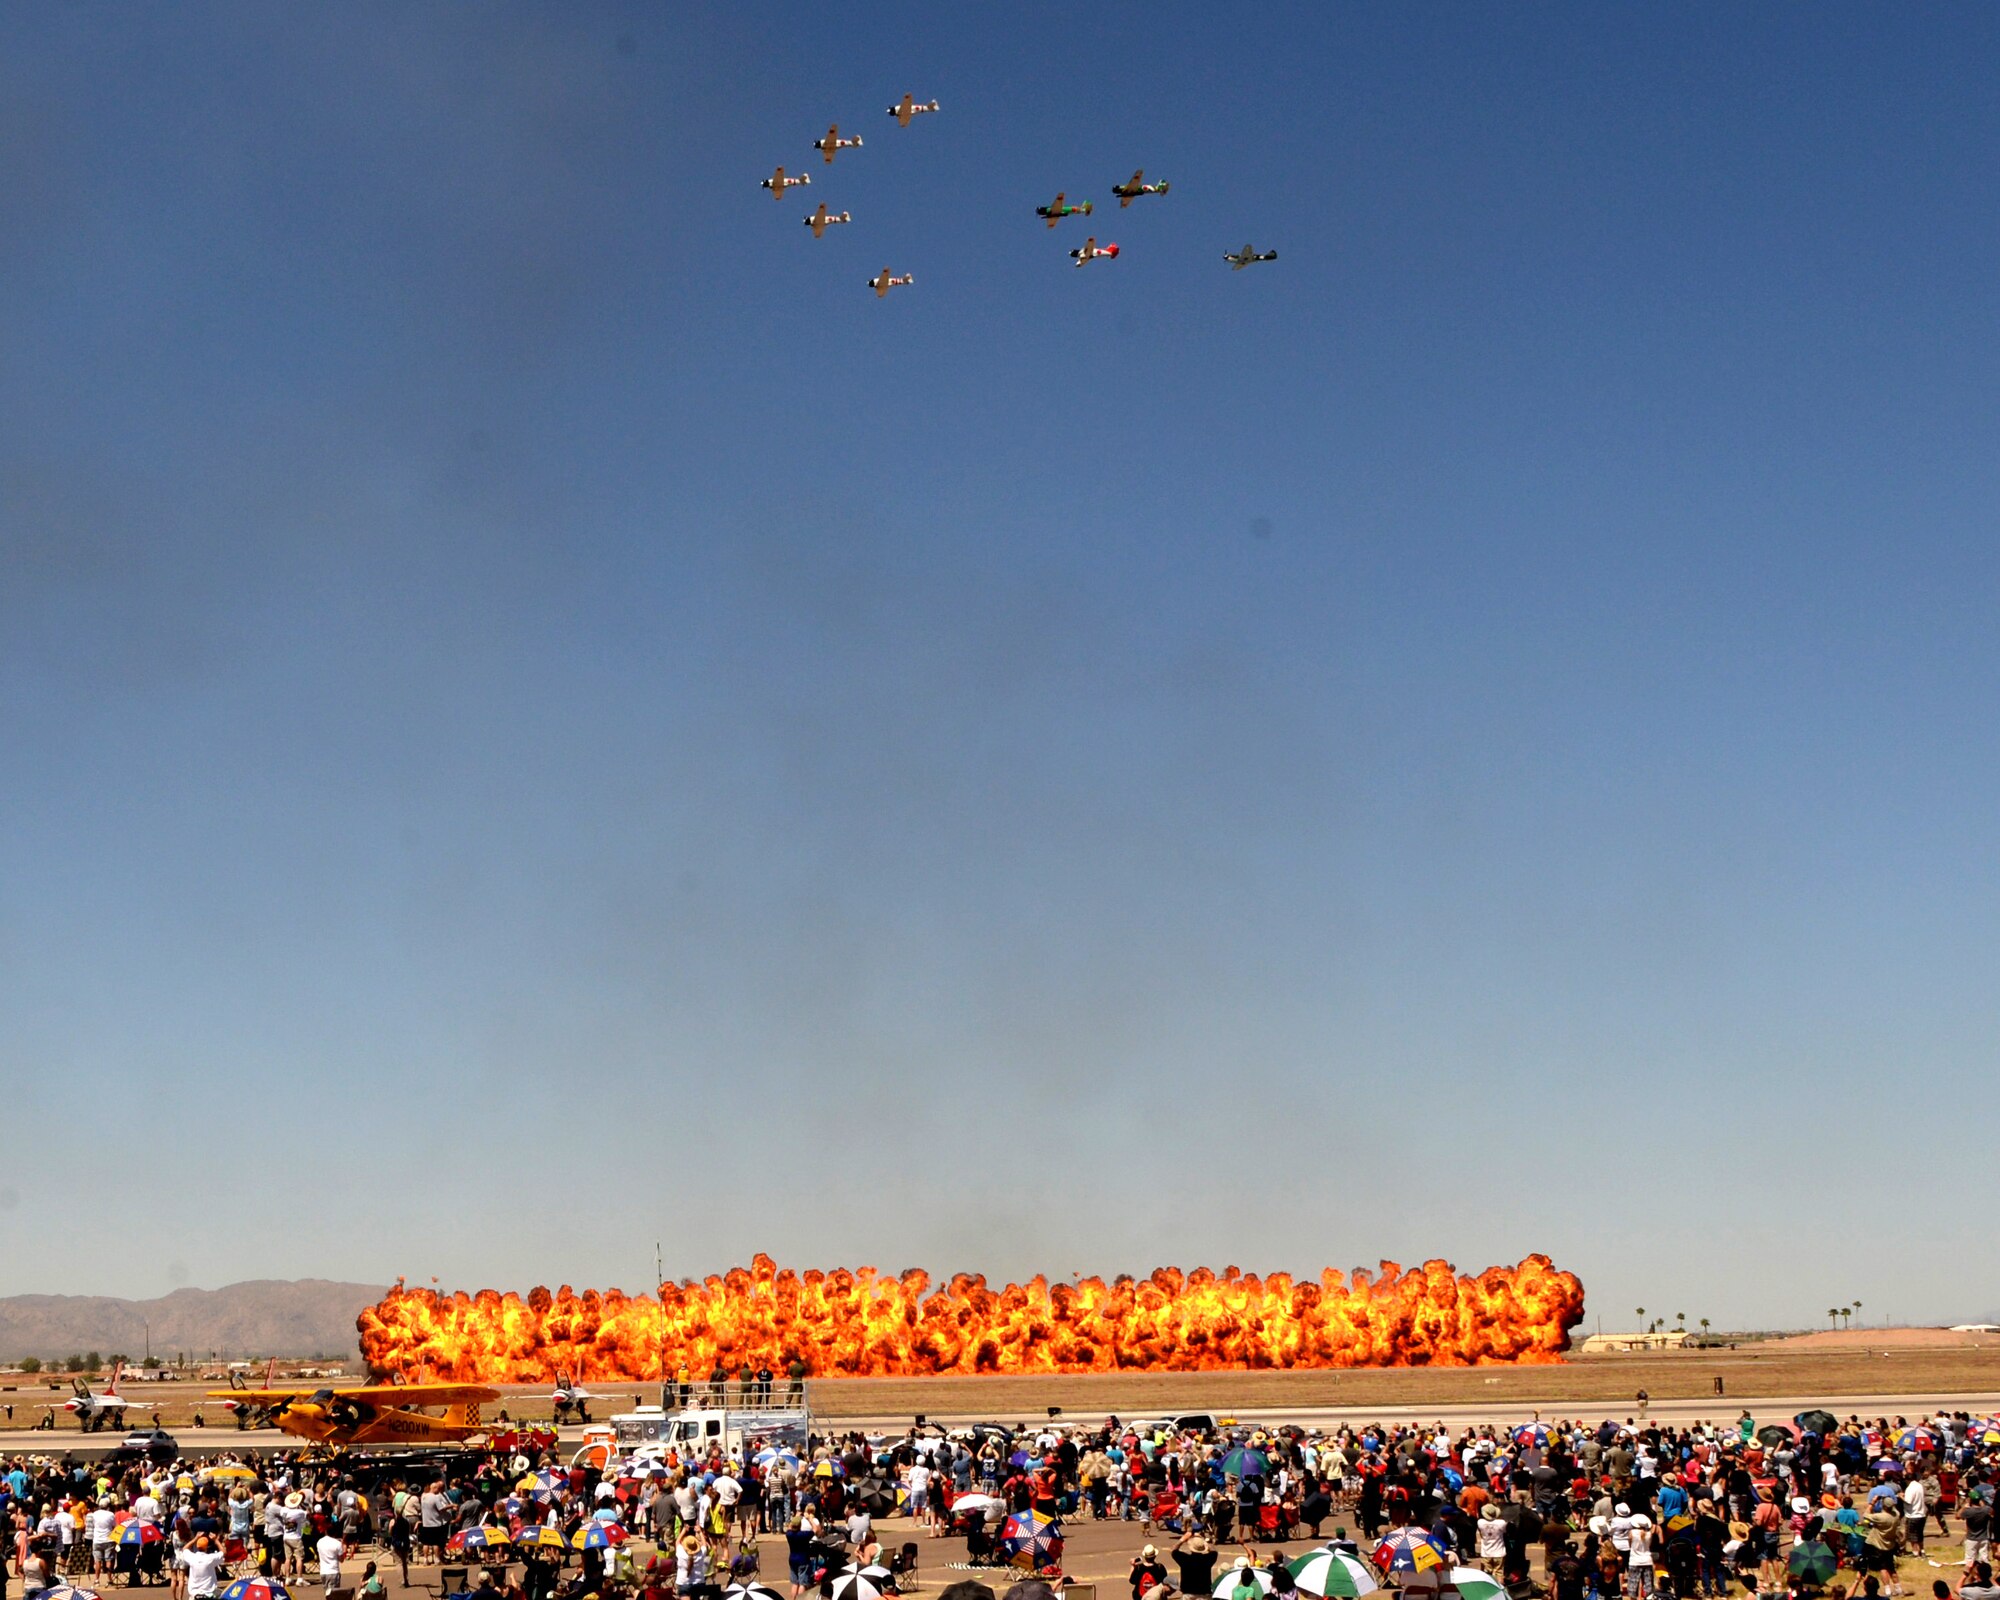 "Tora, Tora, Tora" the Commemorative Air Force's recreation of the Japanese attack on Pearl Harbor that signaled the beginning of the American involvement in World War II April 3, 2016 on Luke Air Force Base, Ariz. "Tora, Tora, Tora" is intended as a memorial to all the soldiers who gave their lives for our country.  (U.S. Air Force photo by Staff Sgt Staci Miller)